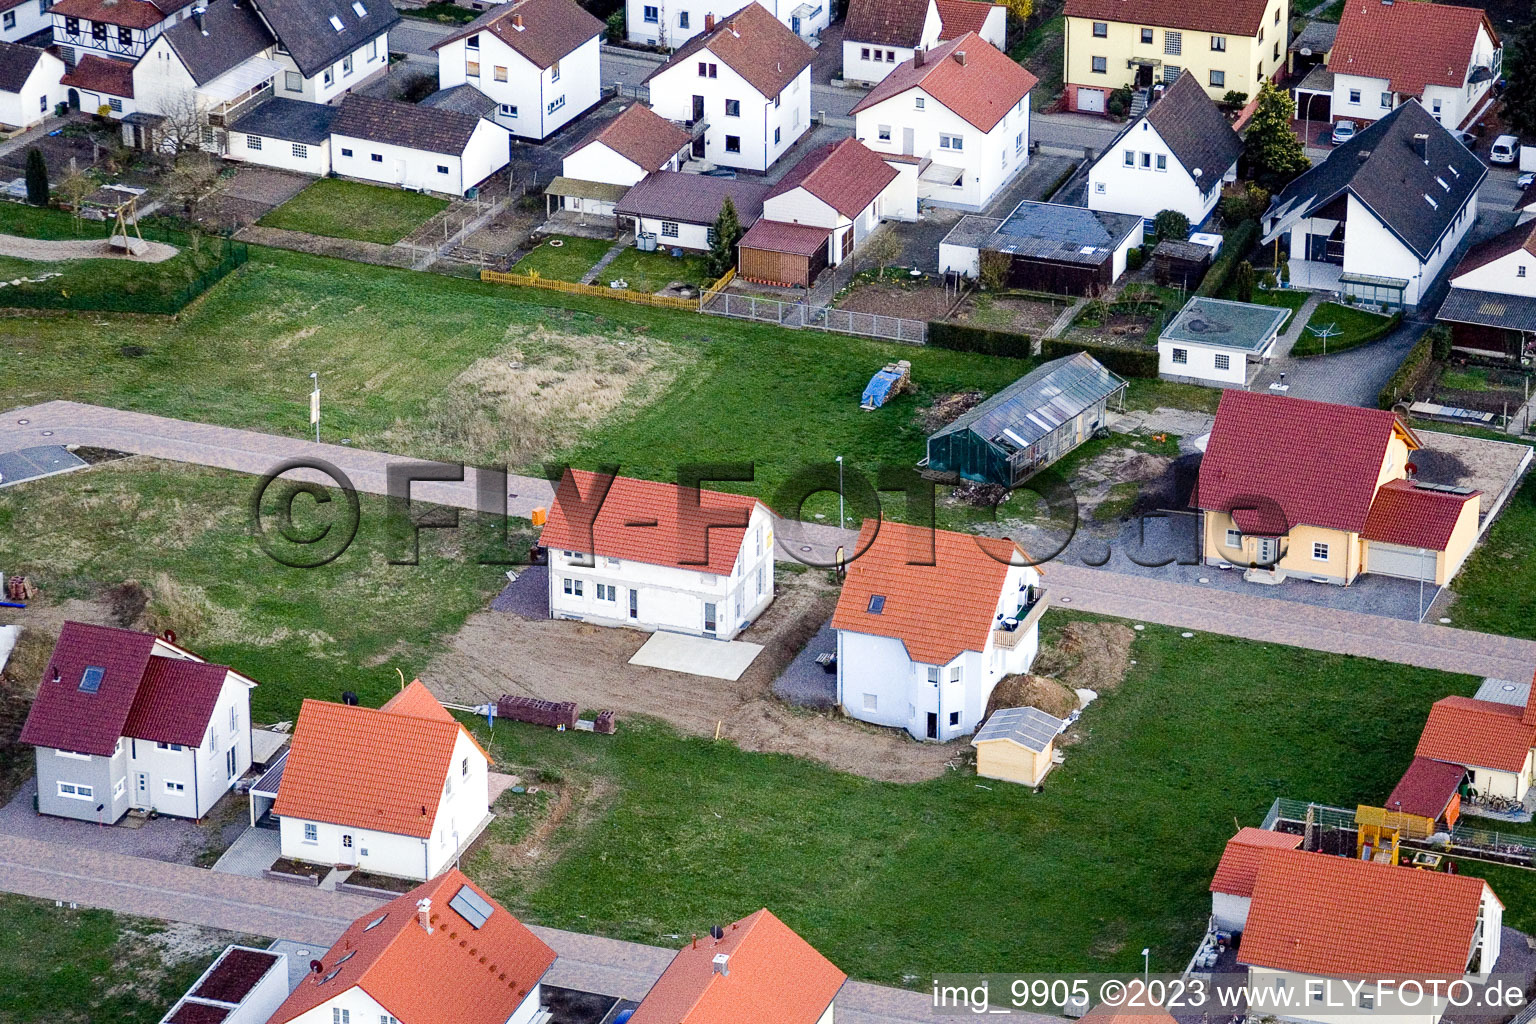 New development area NE in the district Schaidt in Wörth am Rhein in the state Rhineland-Palatinate, Germany out of the air